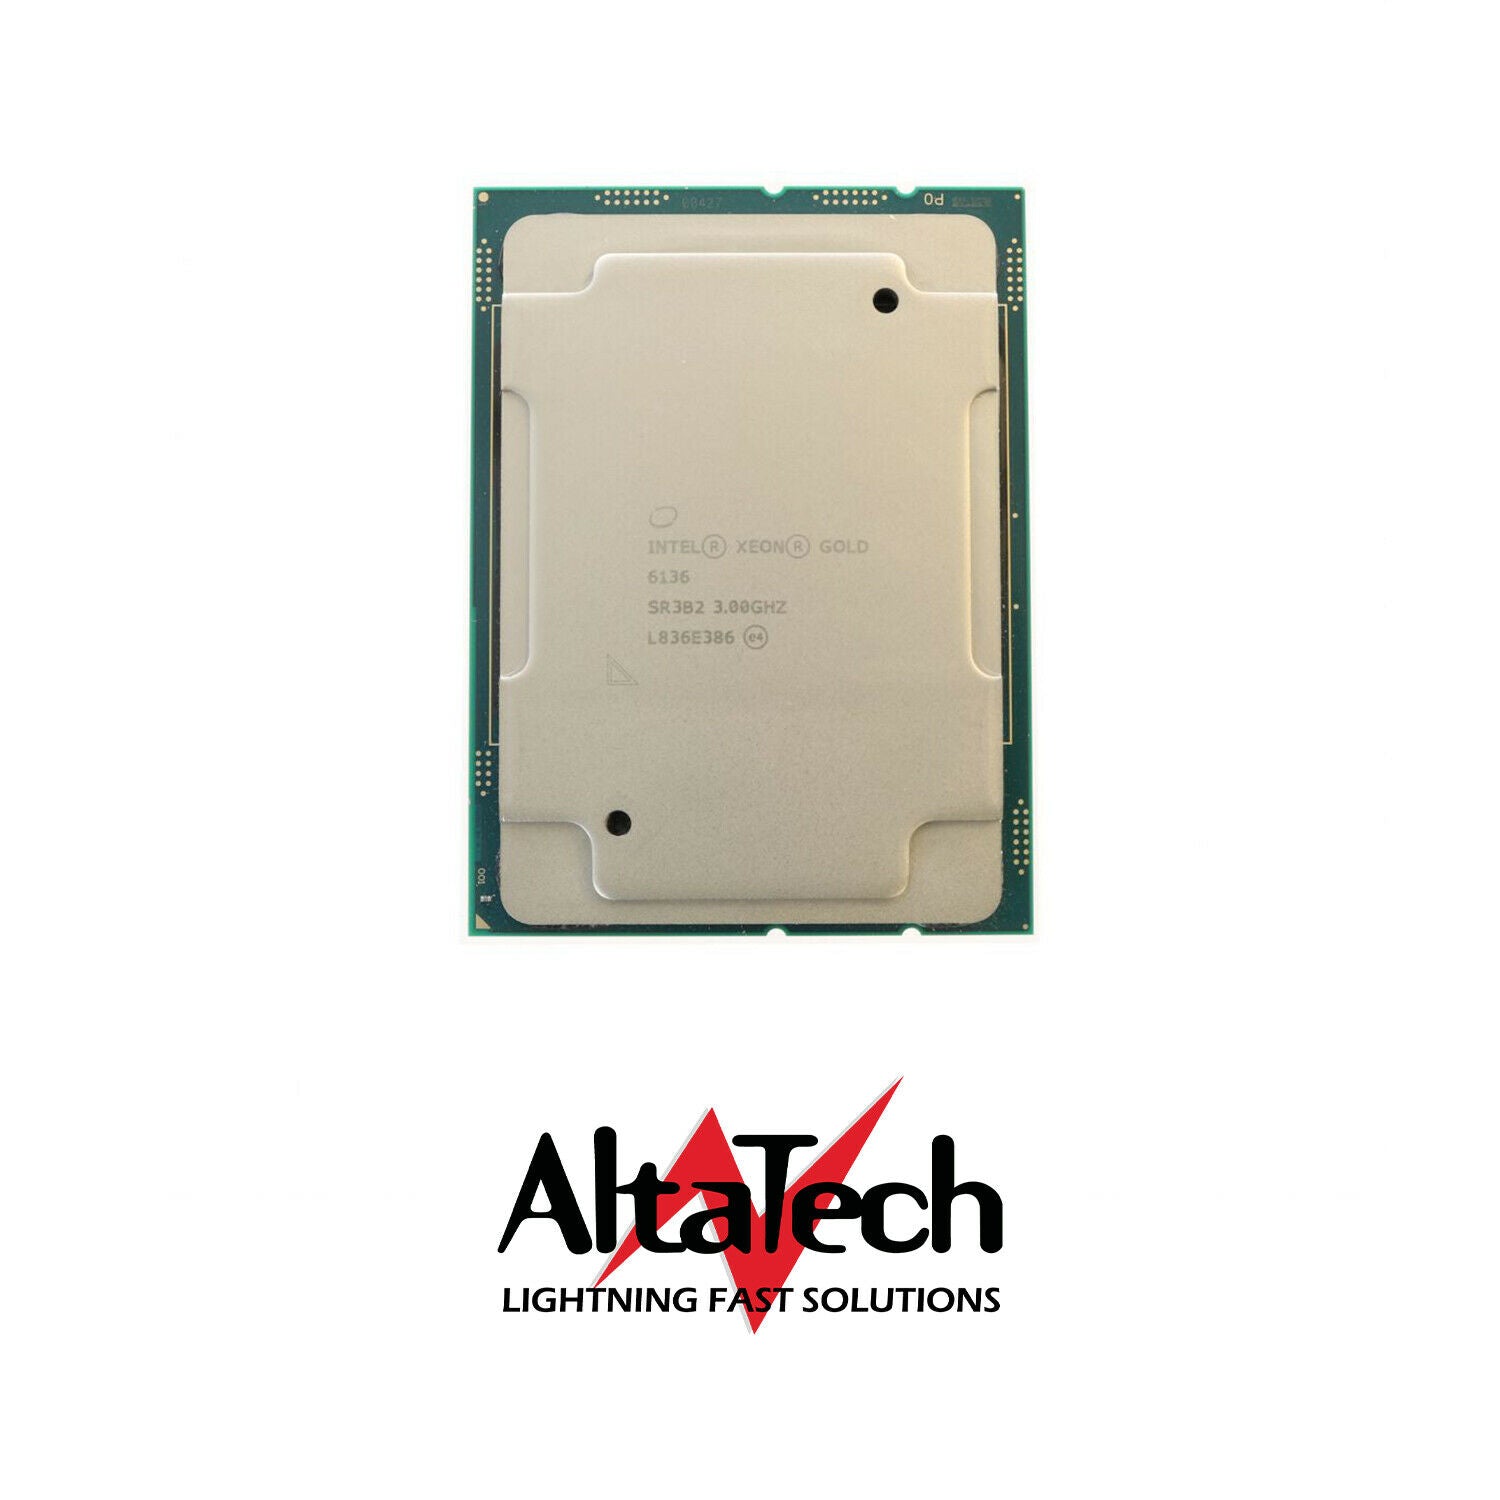 HP 875724-001 Intel Xeon Gold 6136 3.0GHz 24.75MB 12-Core 150W AU Processor w/ Thermal Grease, Used